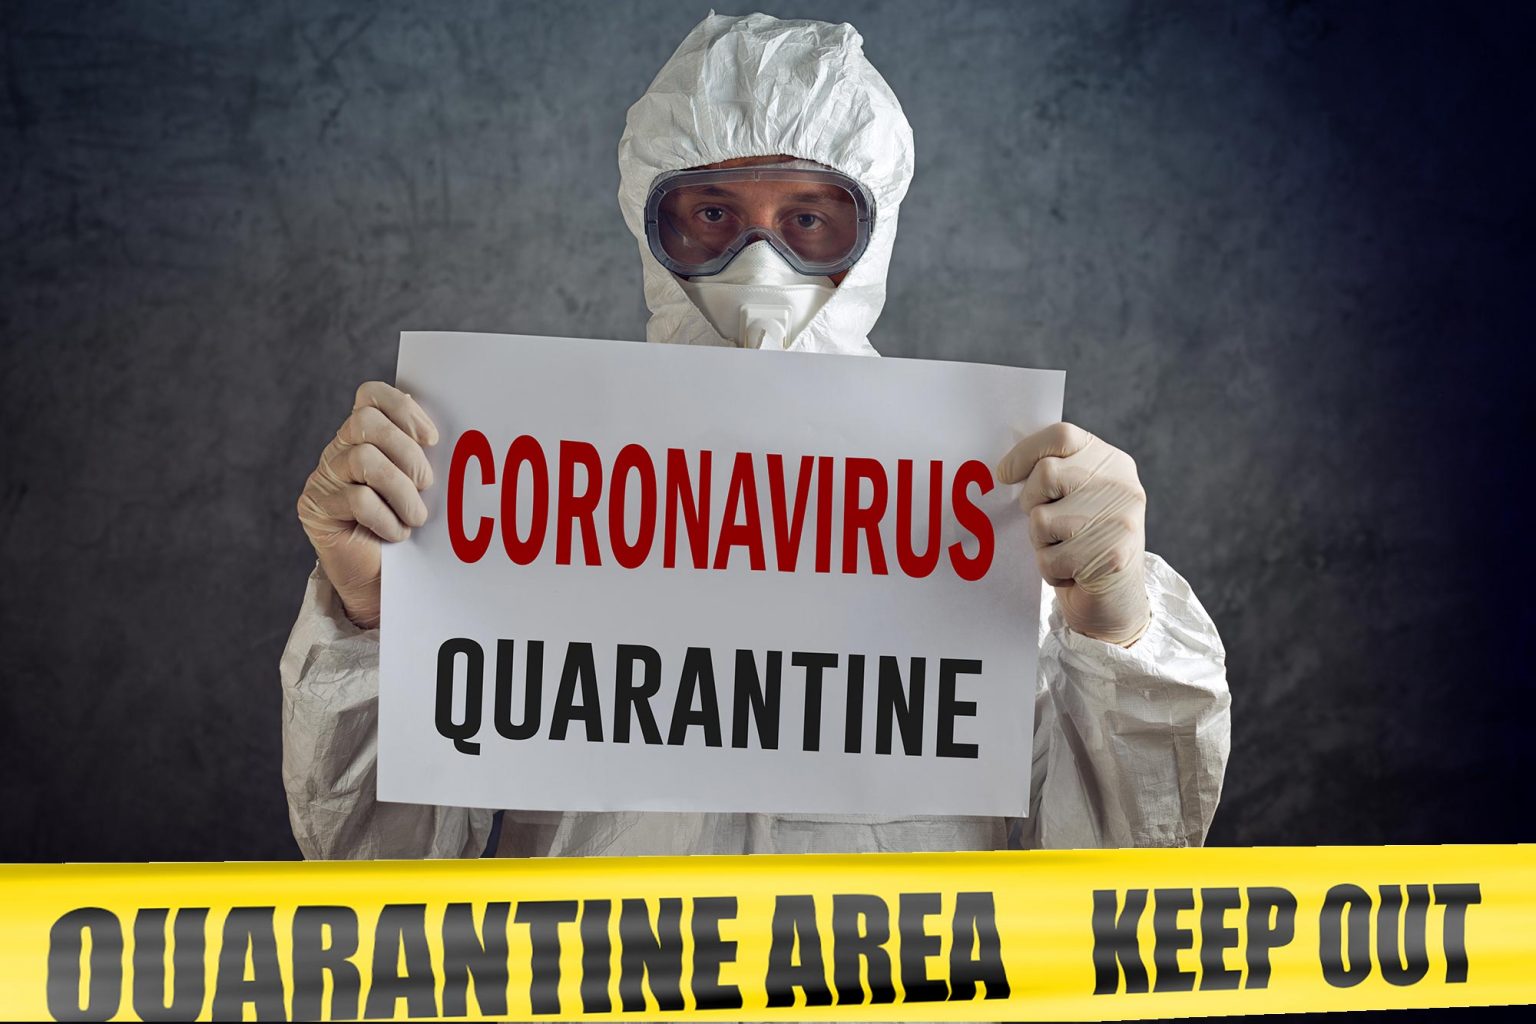 For Thousands of Years, Quarantines Have Tried to Keep Out Disease